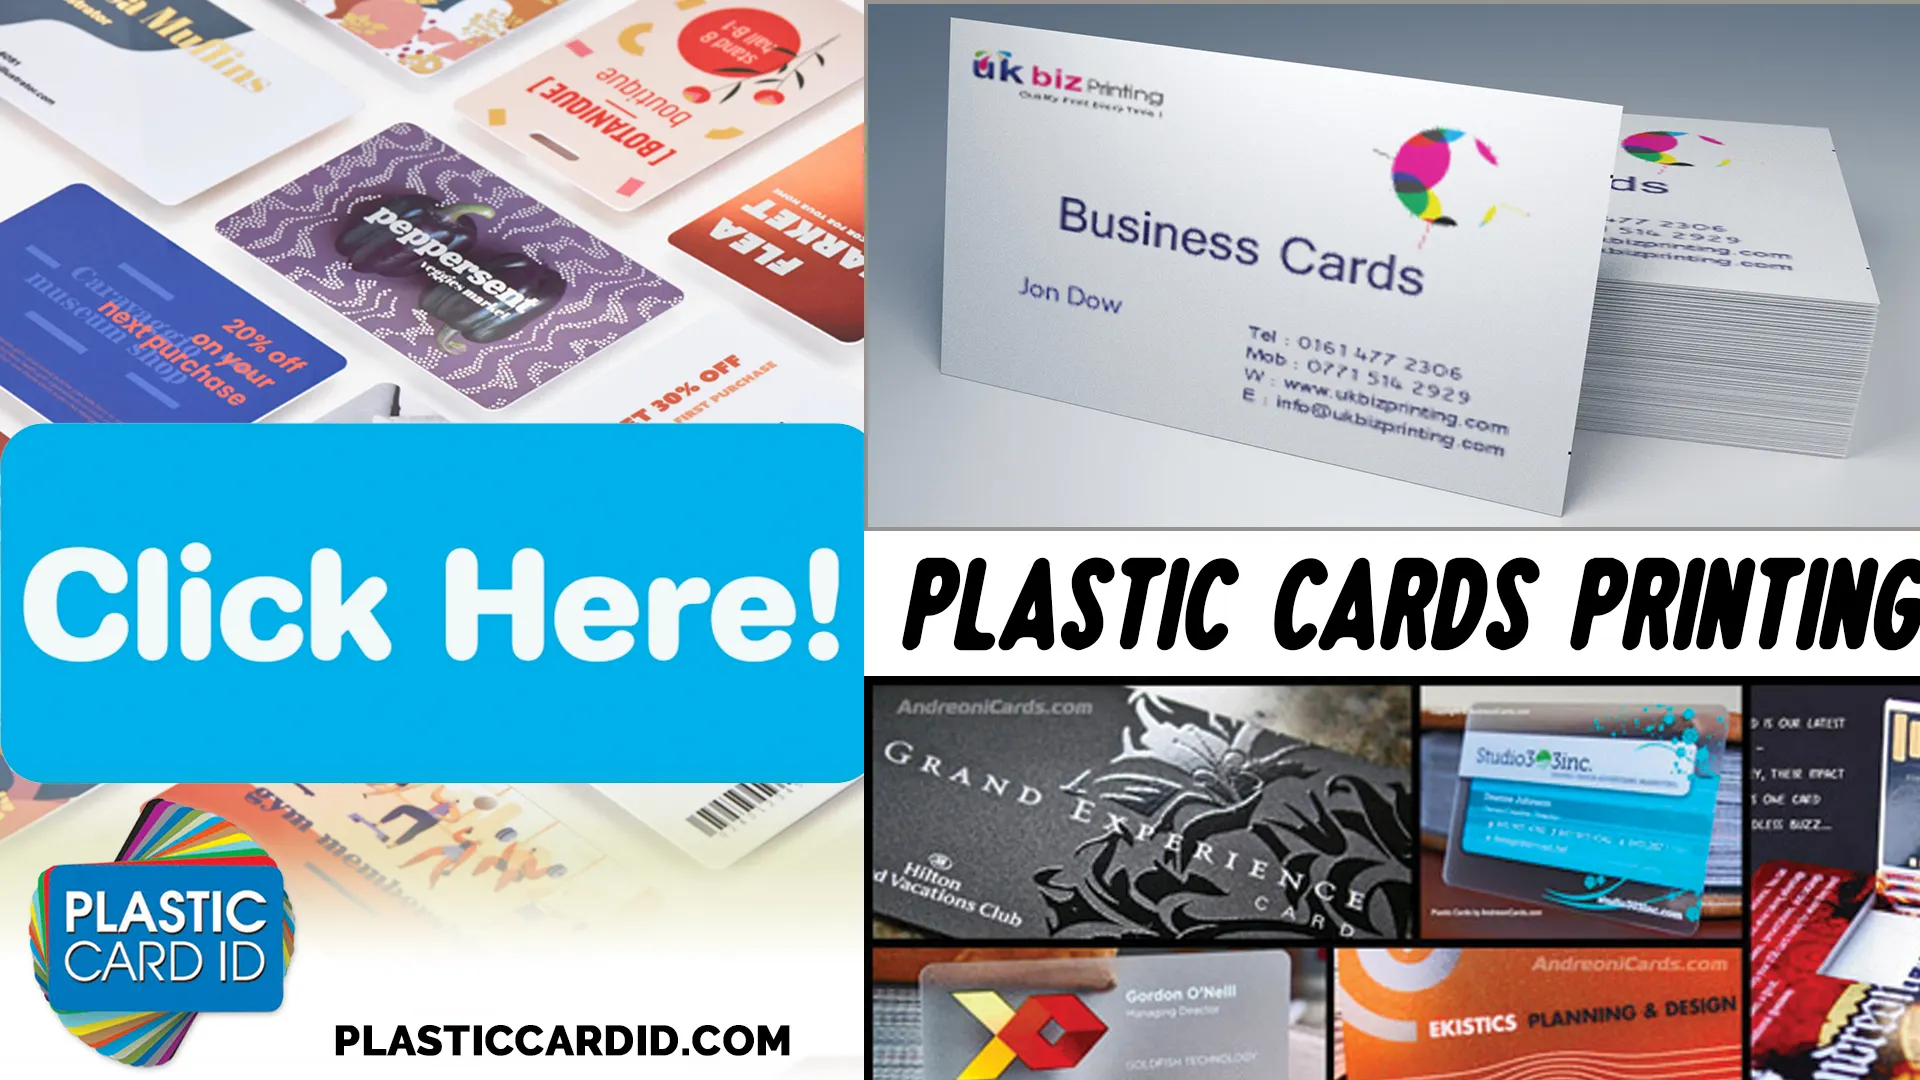 Comprehensive Support and Service from Plastic Card ID
